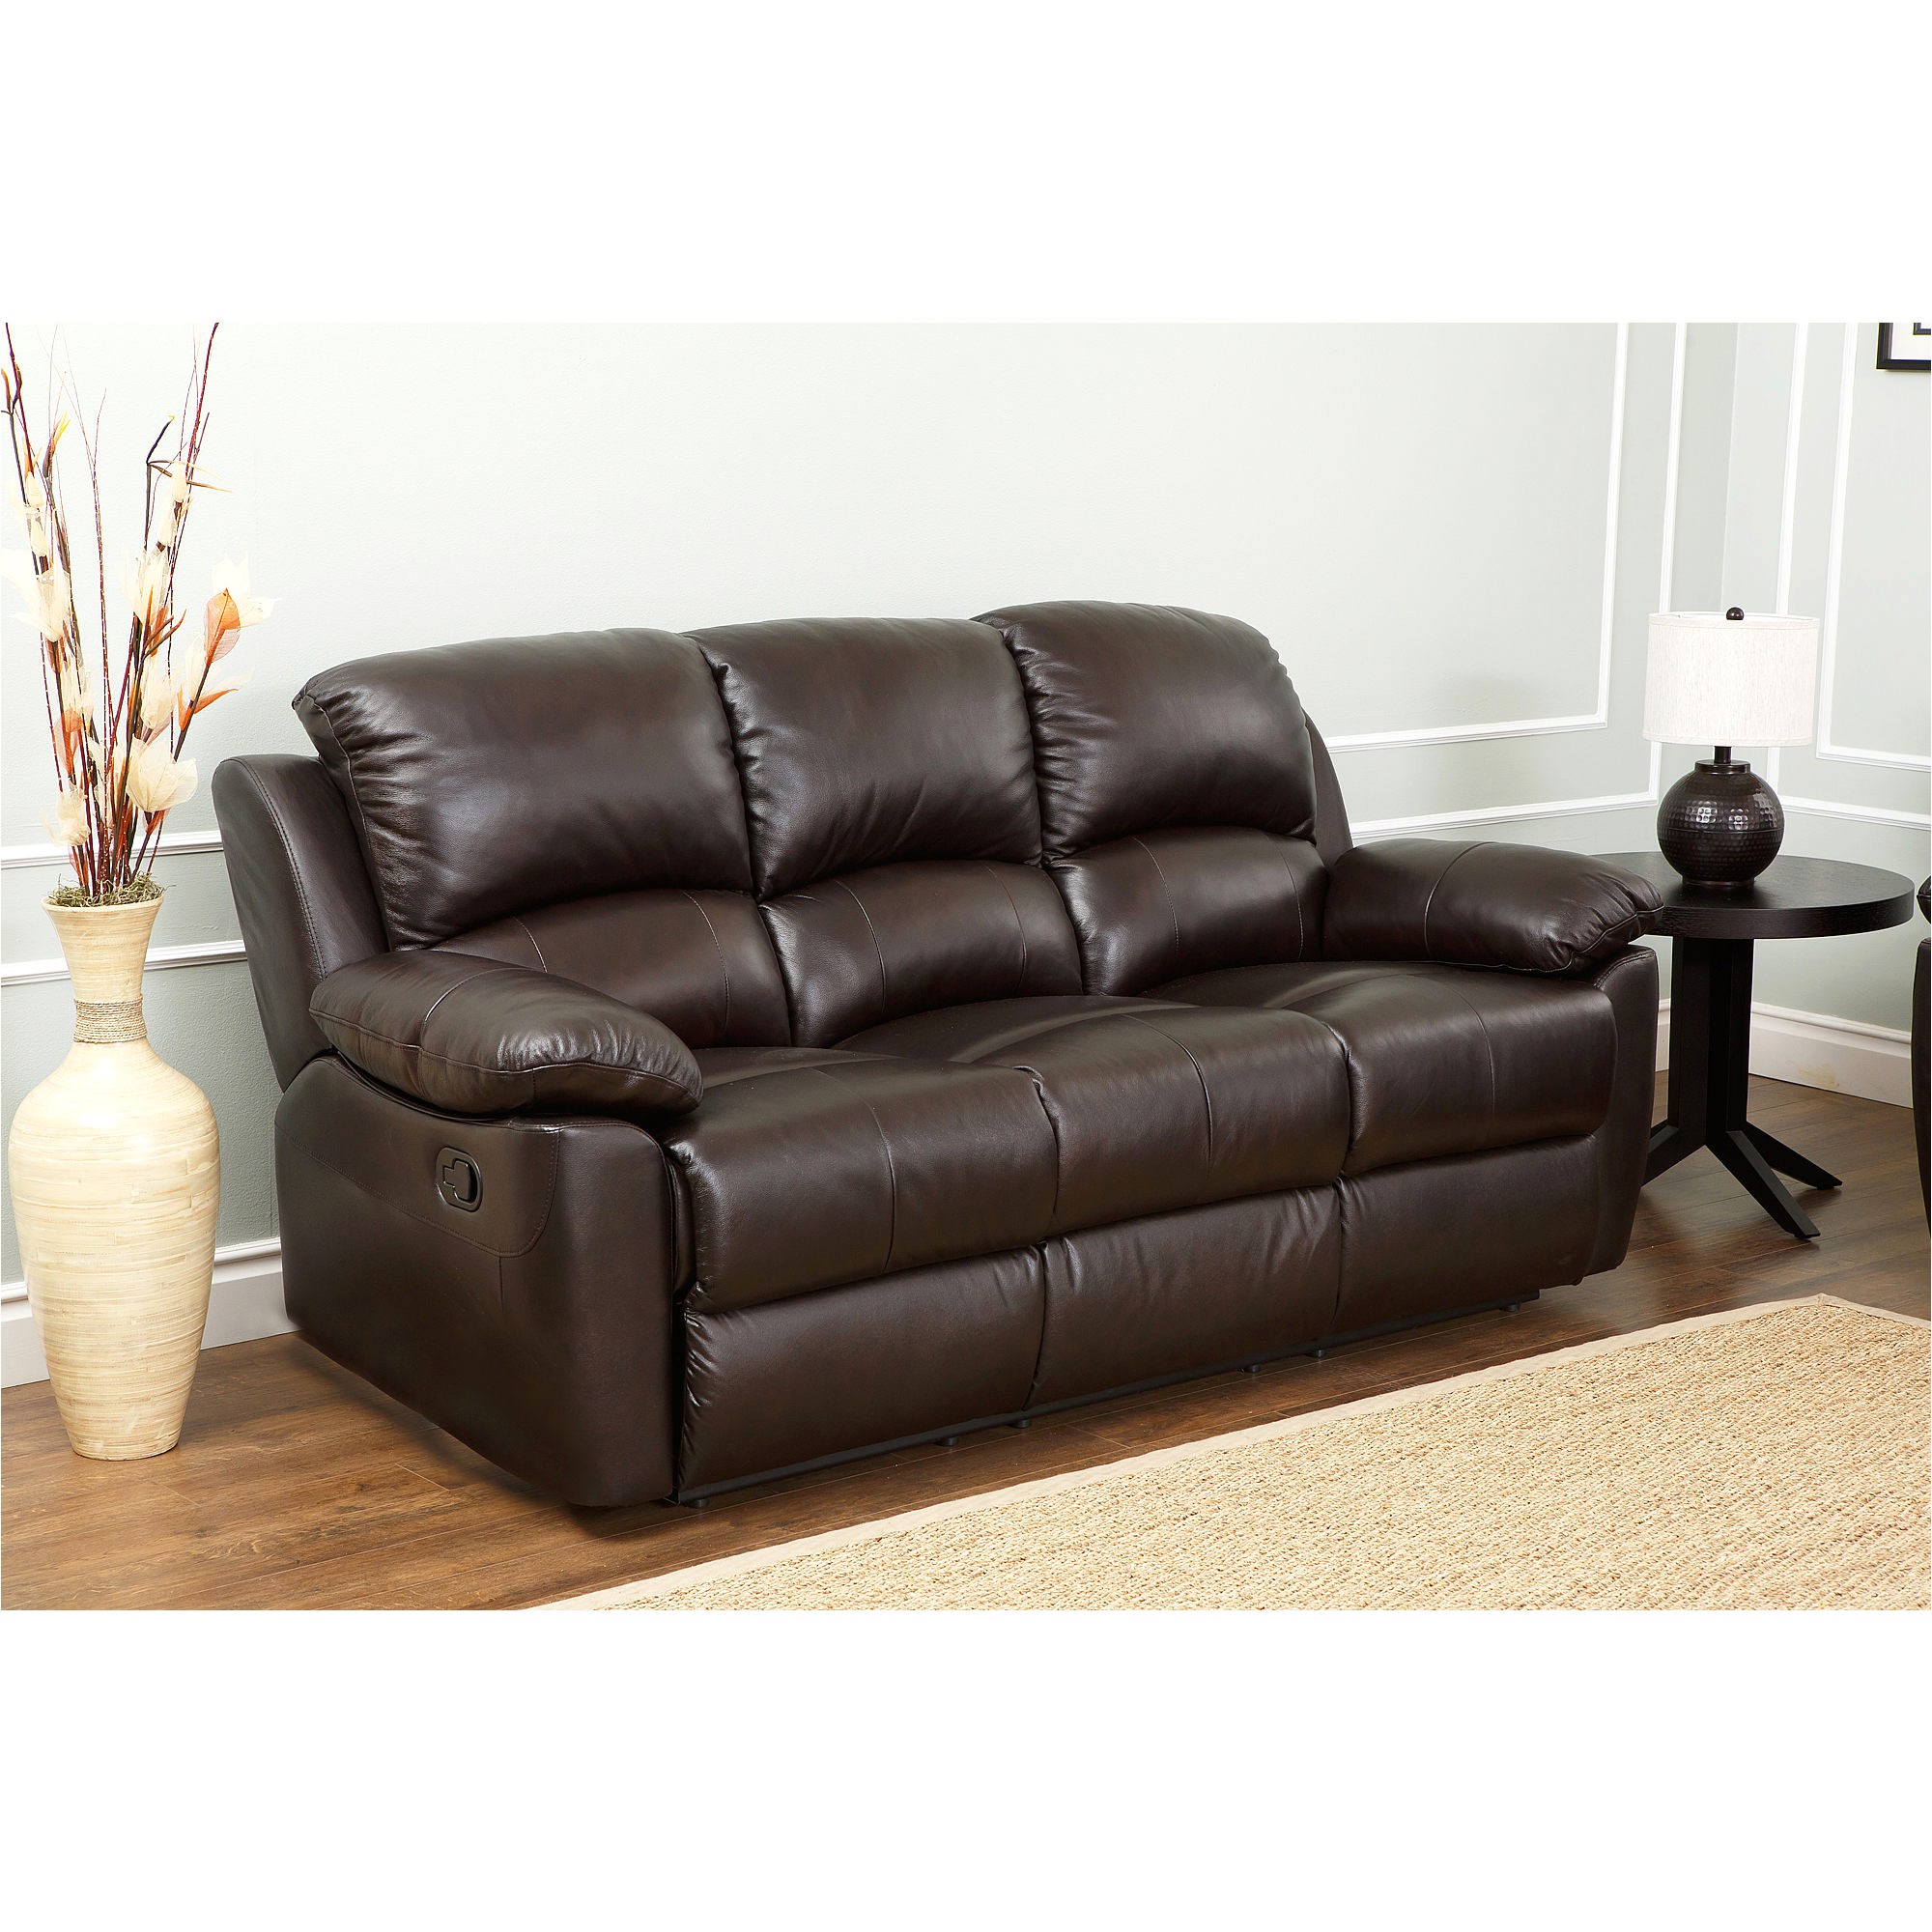 0 undefined 1 undefined 2 undefined bjs wholesale club product from most comfortable reclining sofa